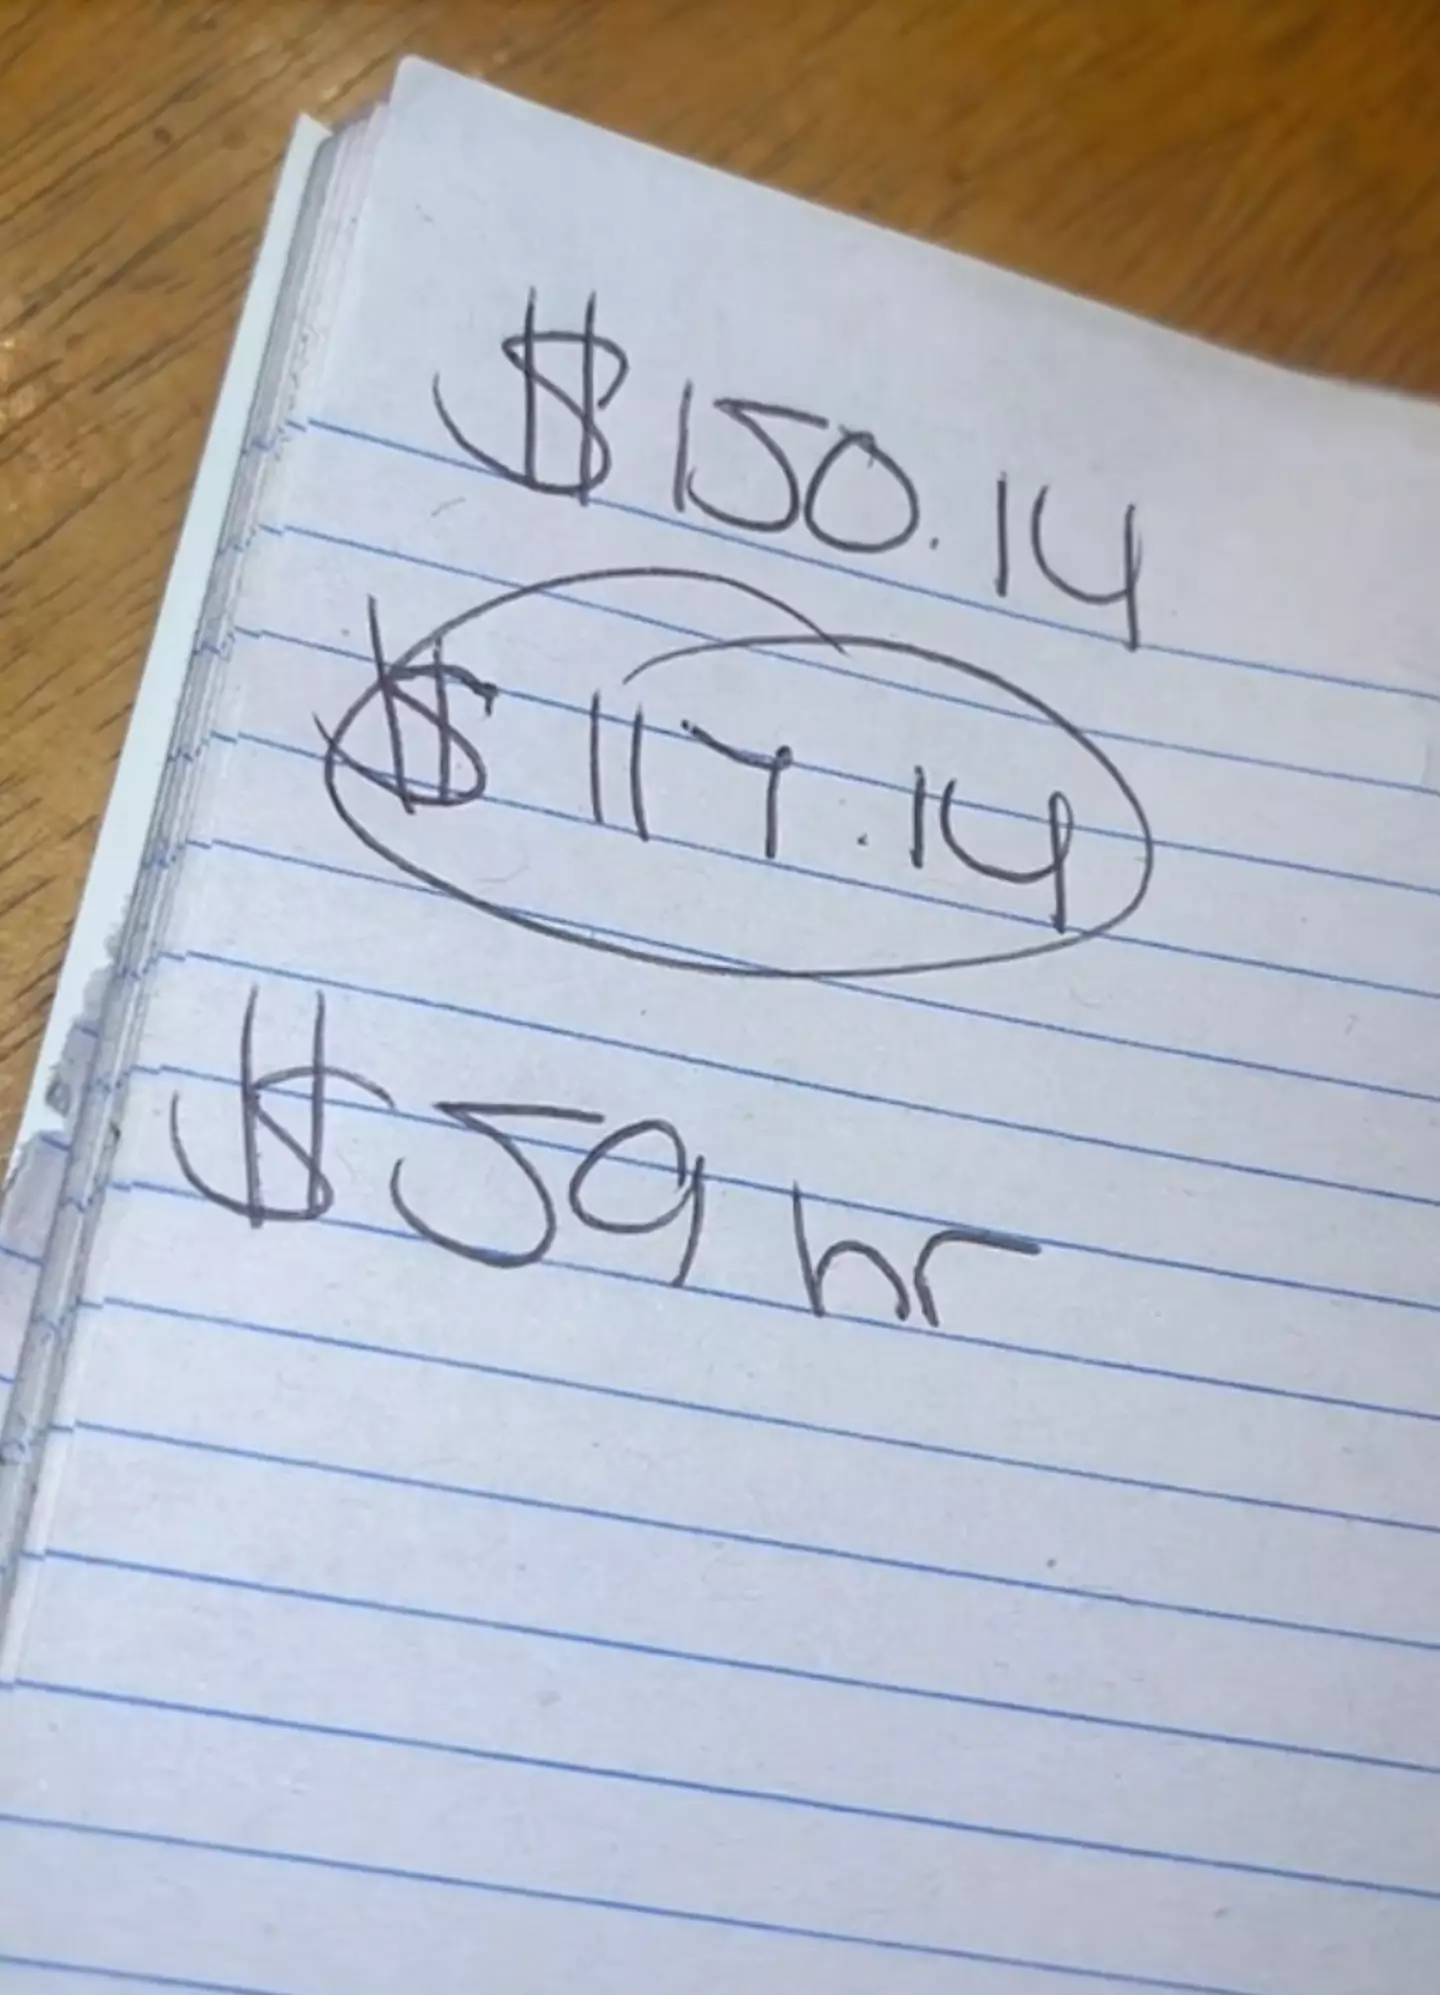 Some diners have resolved to not pay as much in tips anymore.